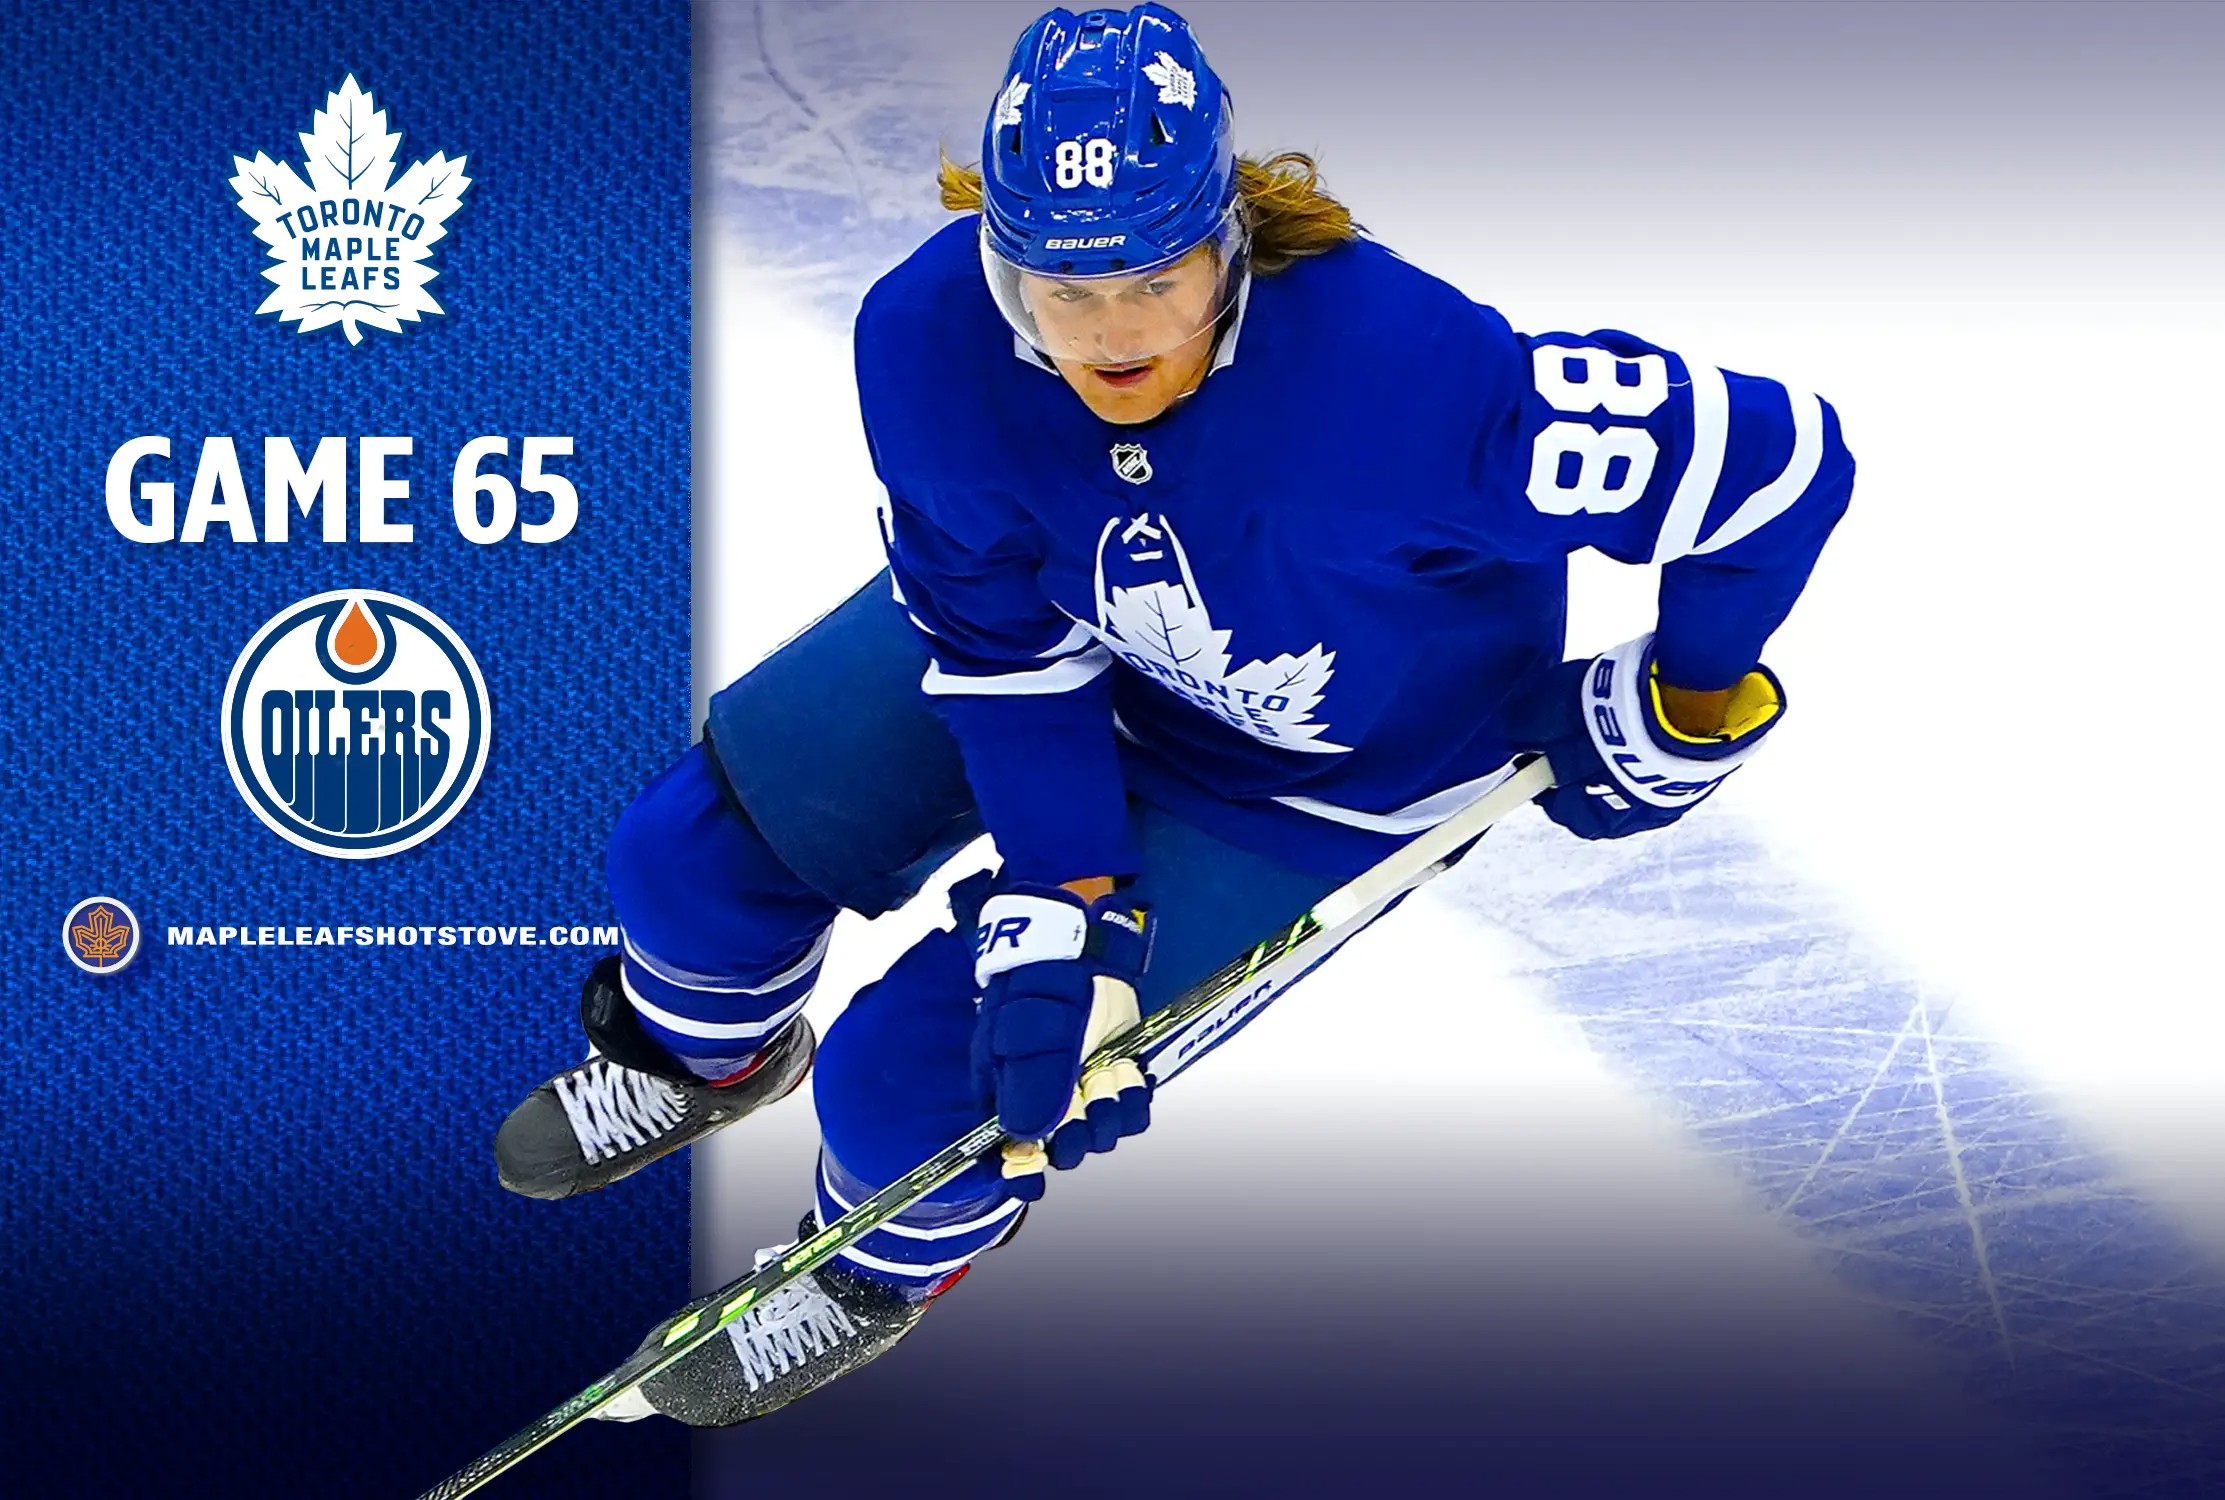 Maple Leafs star William Nylander excited about expected extension